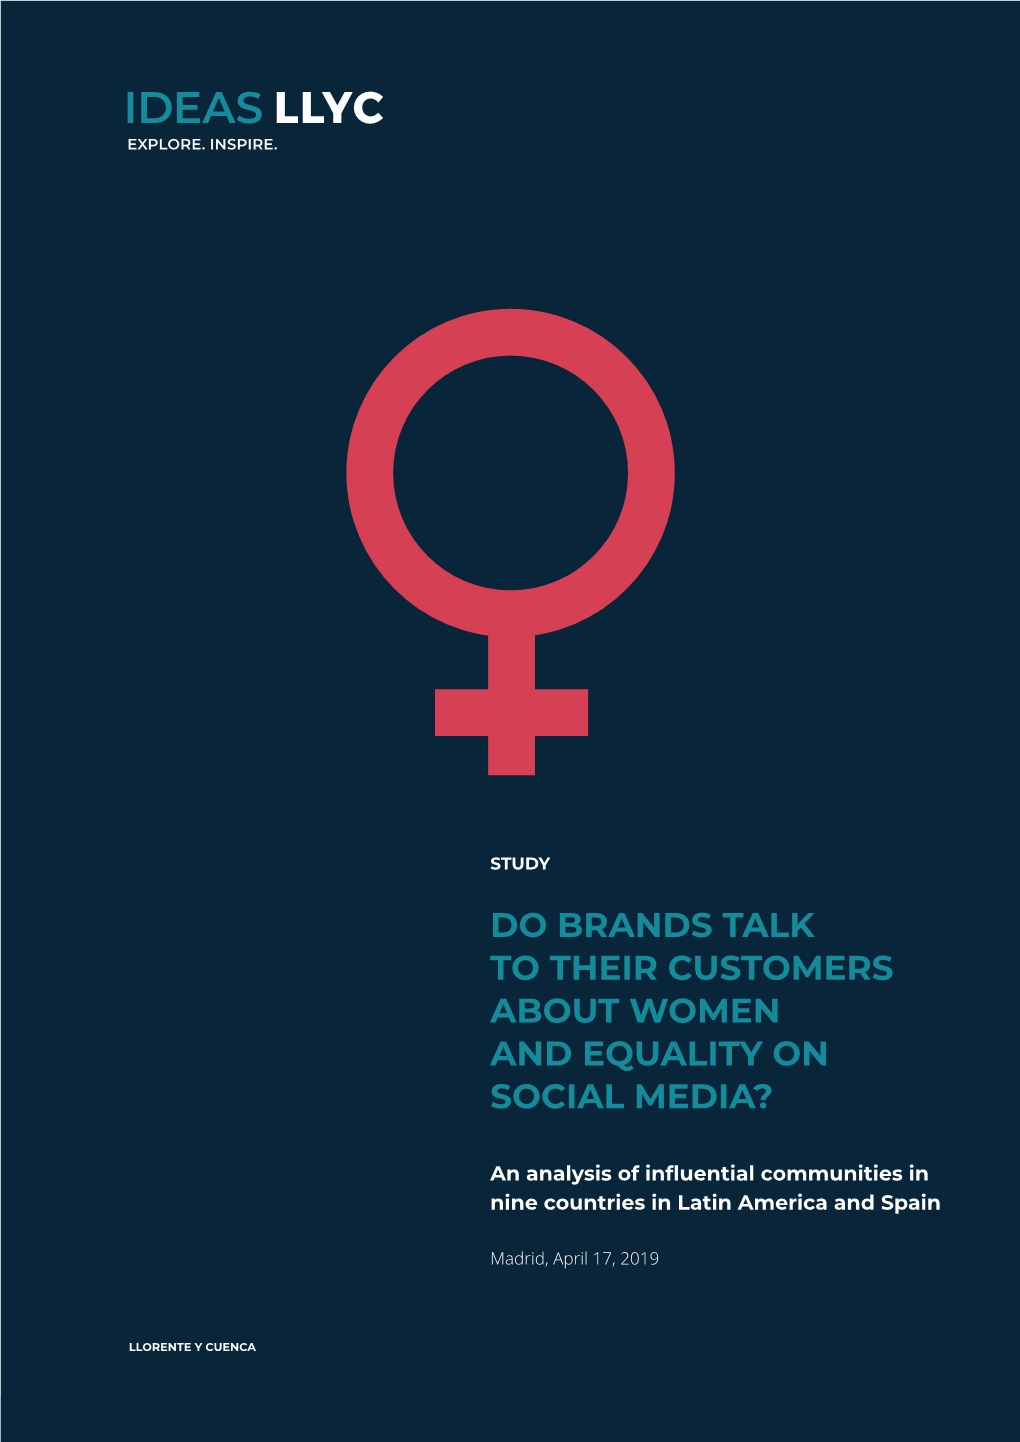 Do Brands Talk to Their Customers About Women and Equality on Social Media?